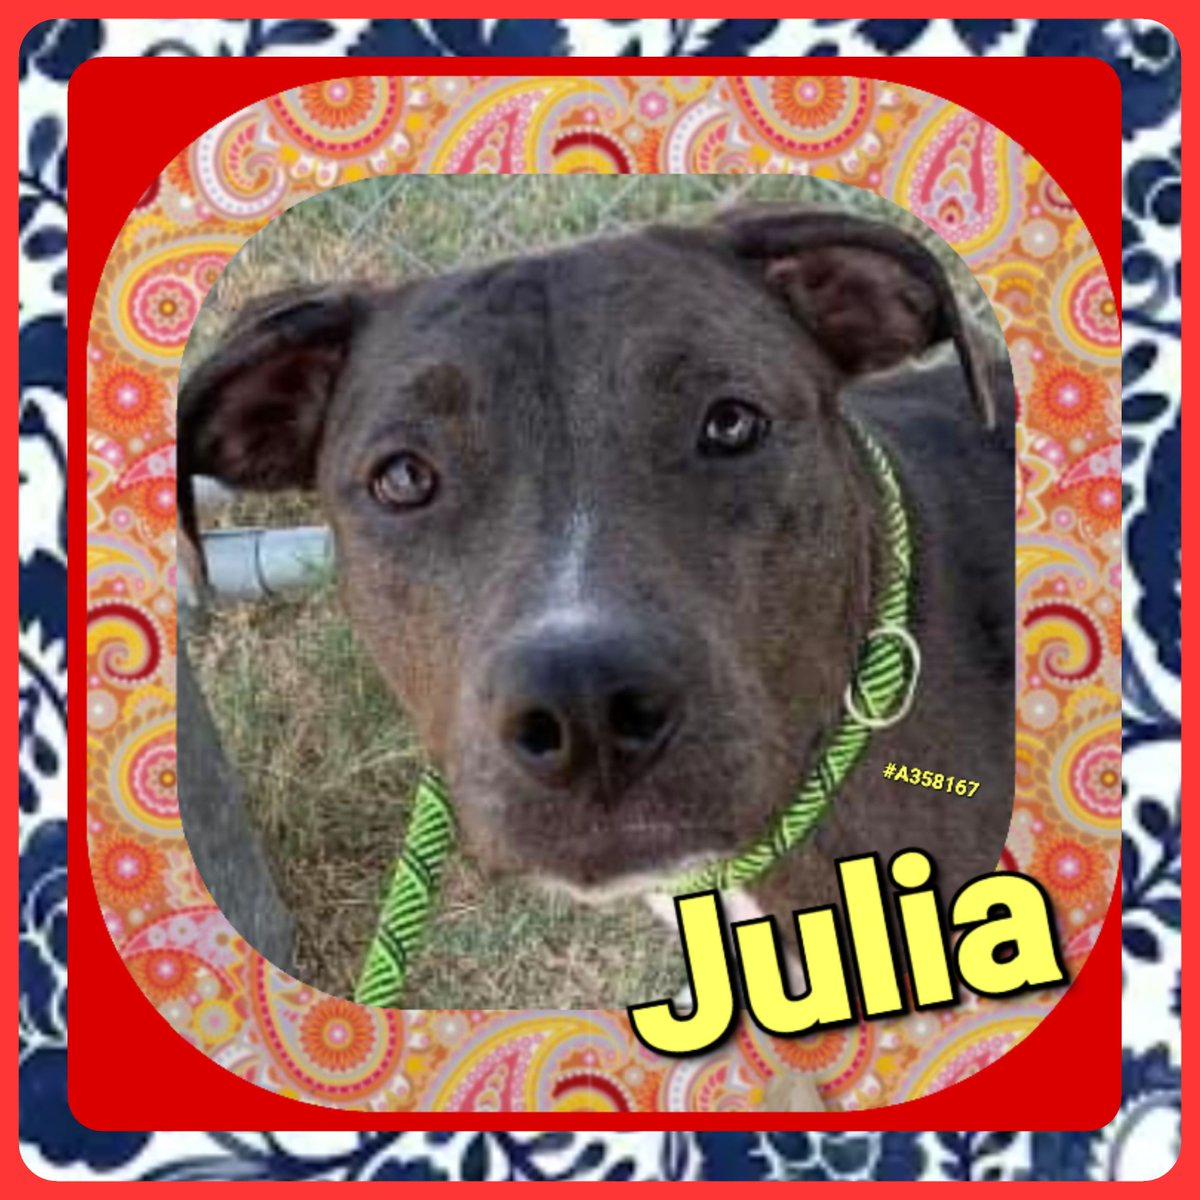 ⏰️🚨 JULIA #A358167 🚨 🐕 At only 1yo this APBT is doomed to DIE on 8/31🔥 Why? Because she is SCARED spitless! Look at the PAIN in those eyes 😢🖤 We can SAVE her! Please pledge 💰 for RESCUE🙏 Contact CORPUS CHRISTI ANIMAL CARE 📧 ccacsrescues@cctexas.com 📞 361-826-4630